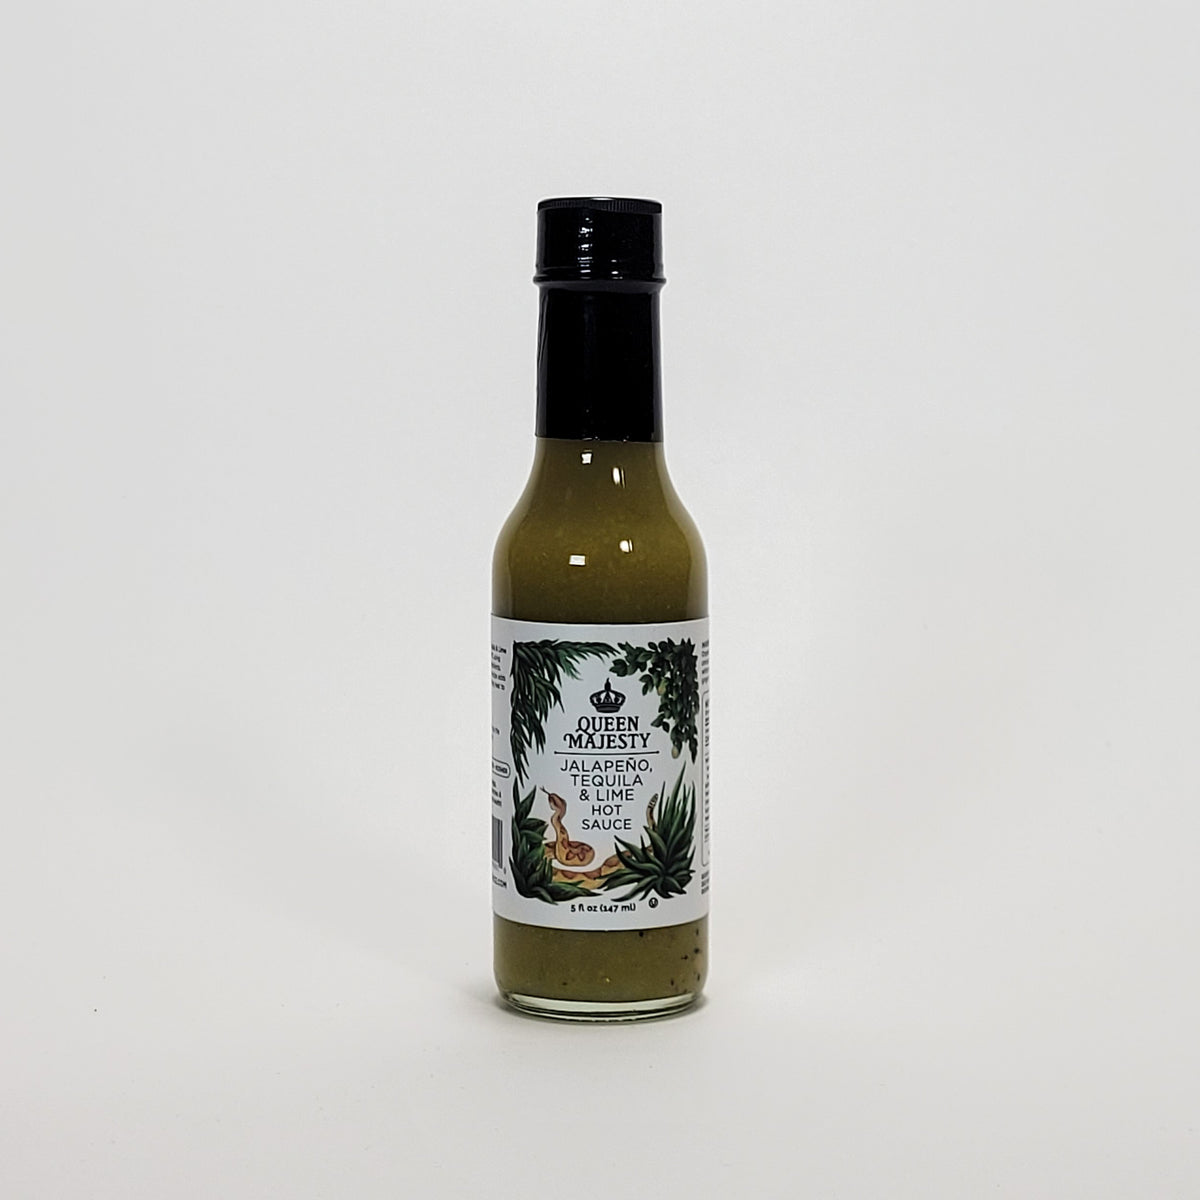 Queen Majesty Jalapeno Tequila and Lime hot sauce hot sauce